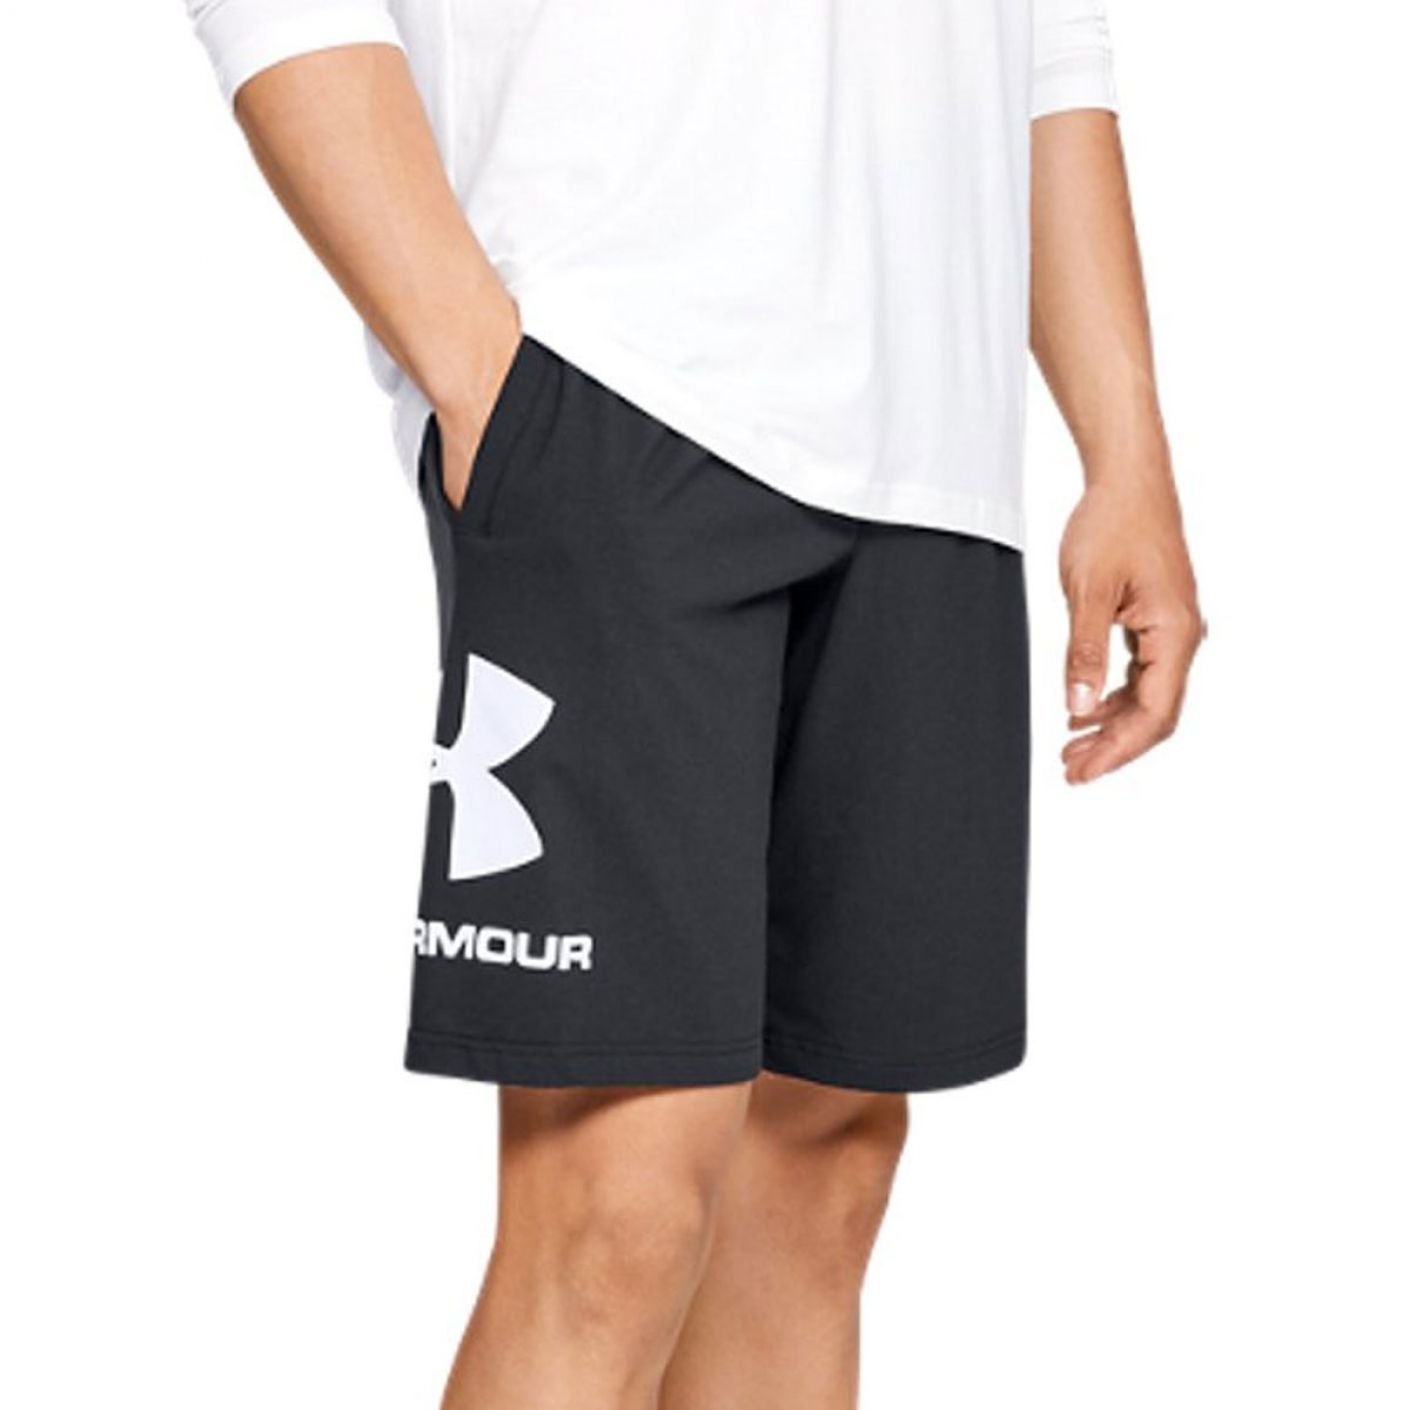 Under Armor Shorts Sportstyle in Black Cotton